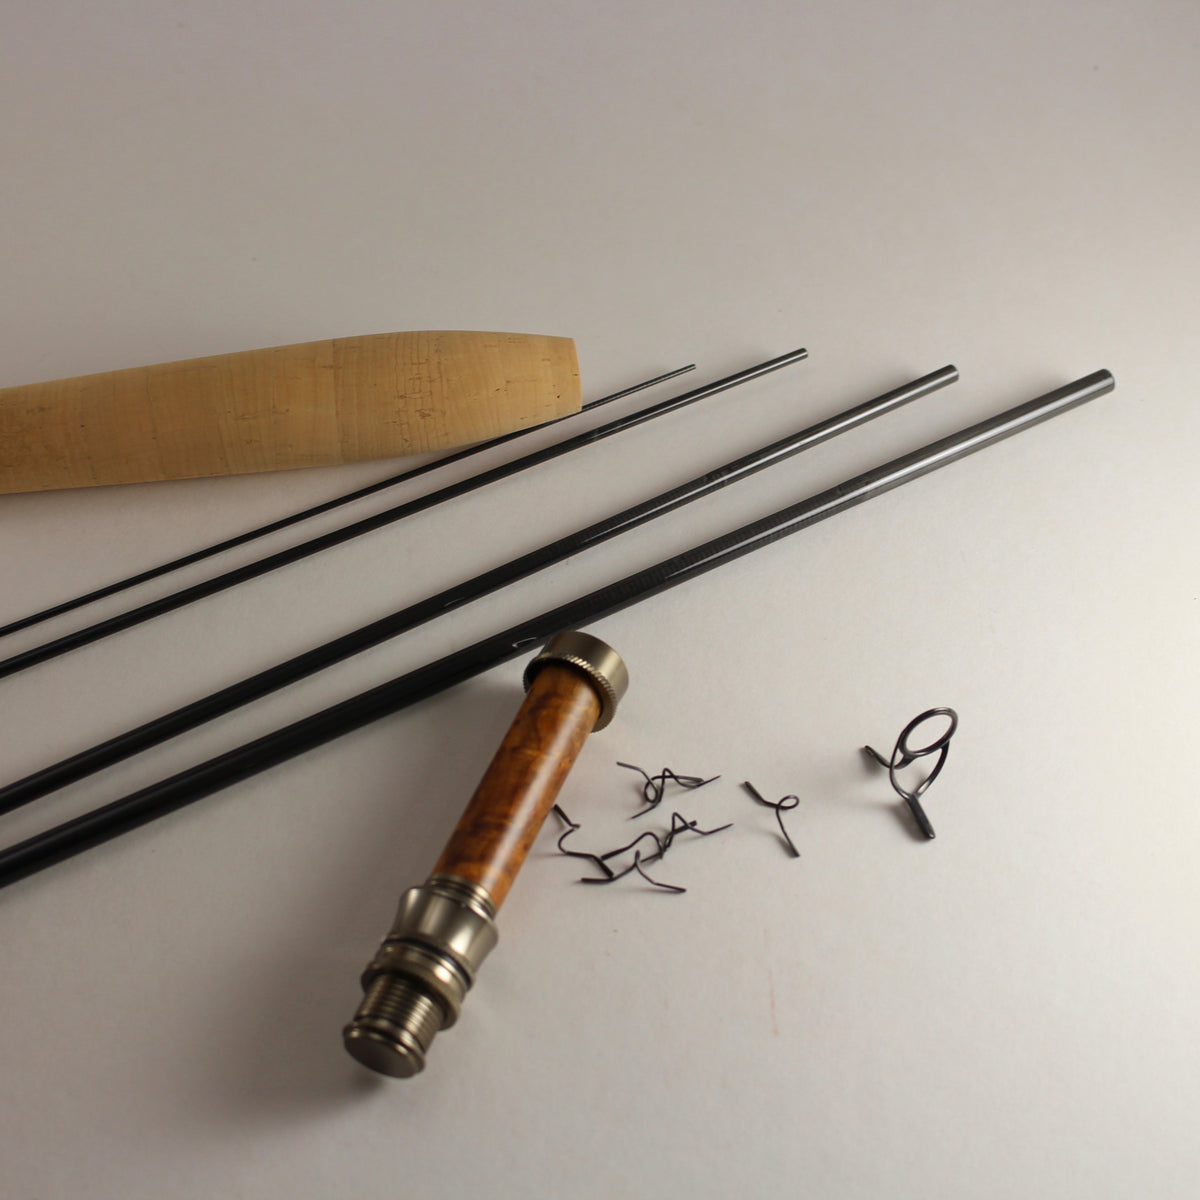 6'6 2wt. (four piece) carbon fiber fly rod blank (NOW IN A GLOSSY